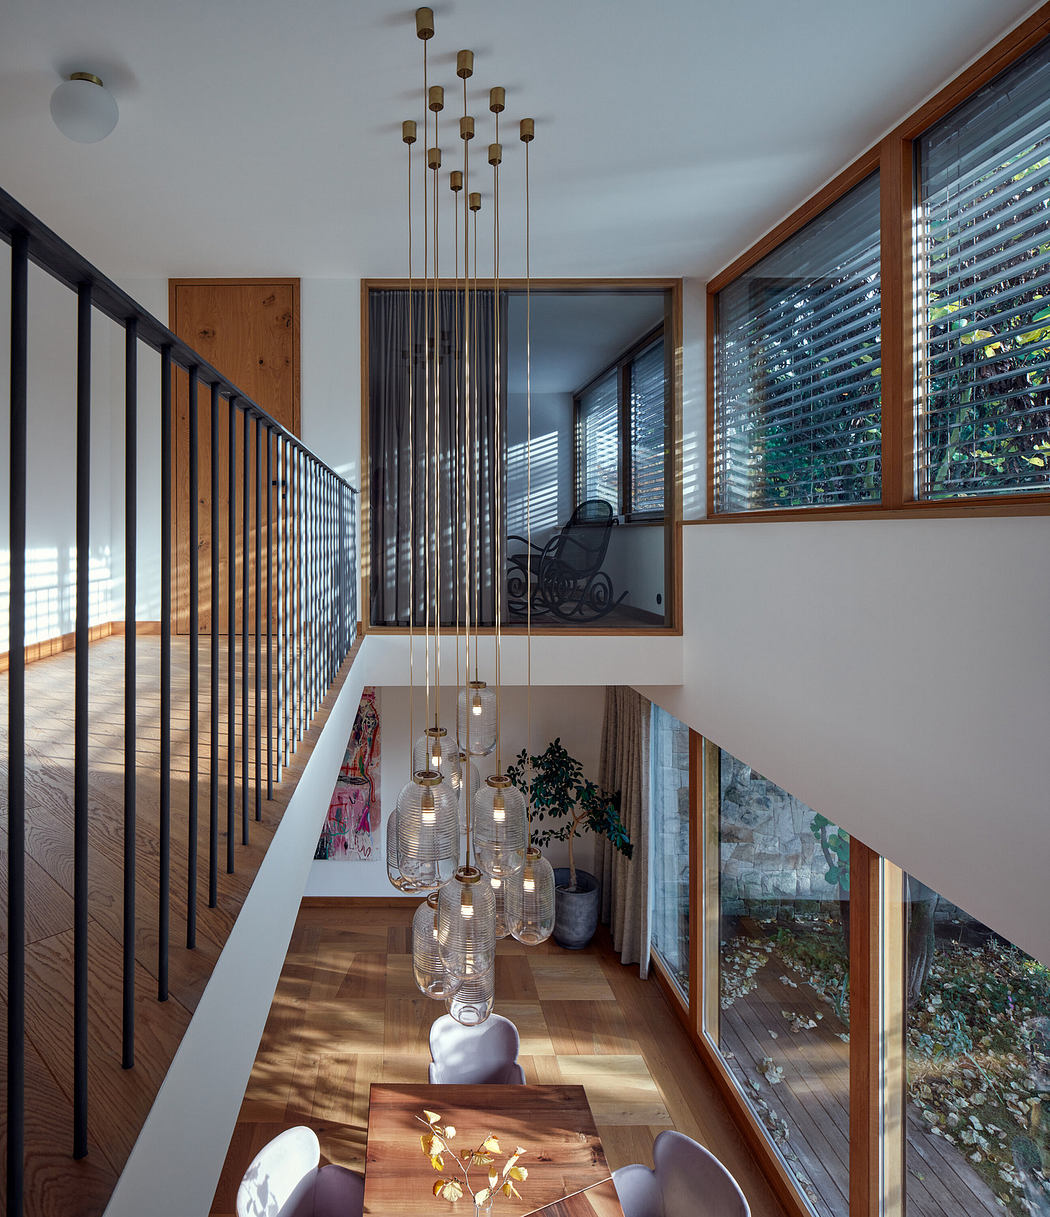 Modern two-level interior with wooden finishes, glass pendant lights, and a staircase.